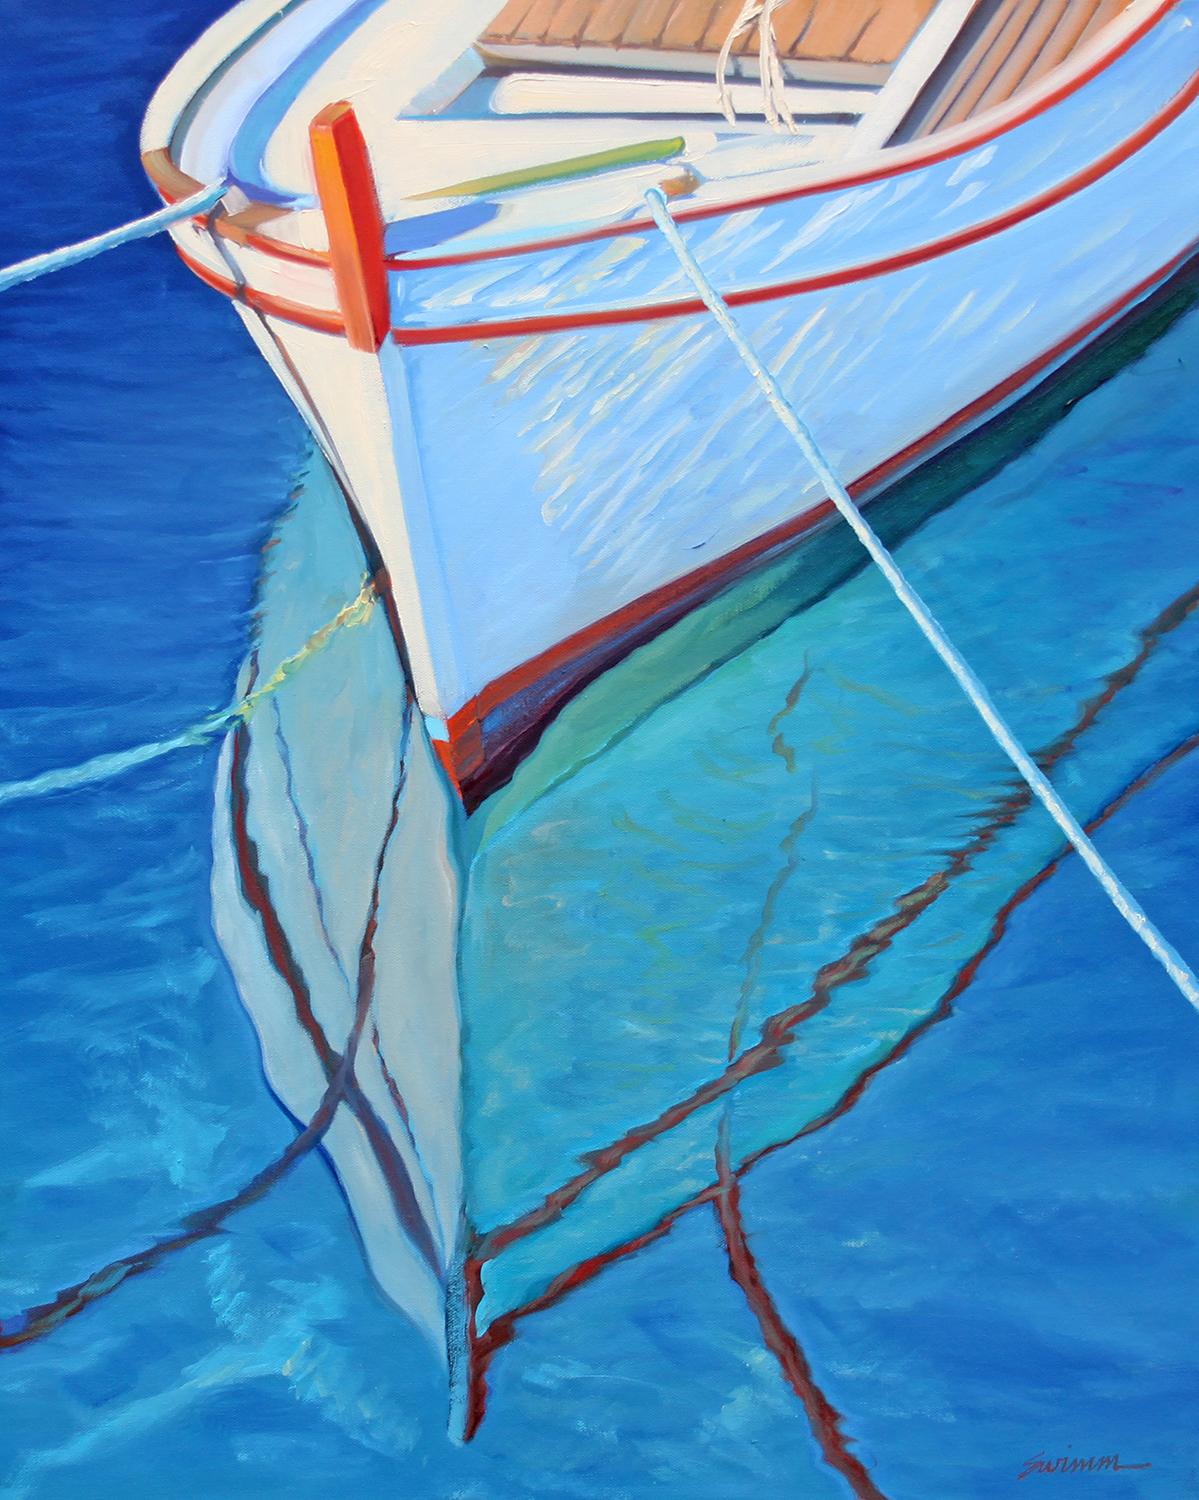 Tom Swimm Landscape Painting -  "Harbor Symmetry" Wooden Boat Tied Up With Glowing Water Reflections